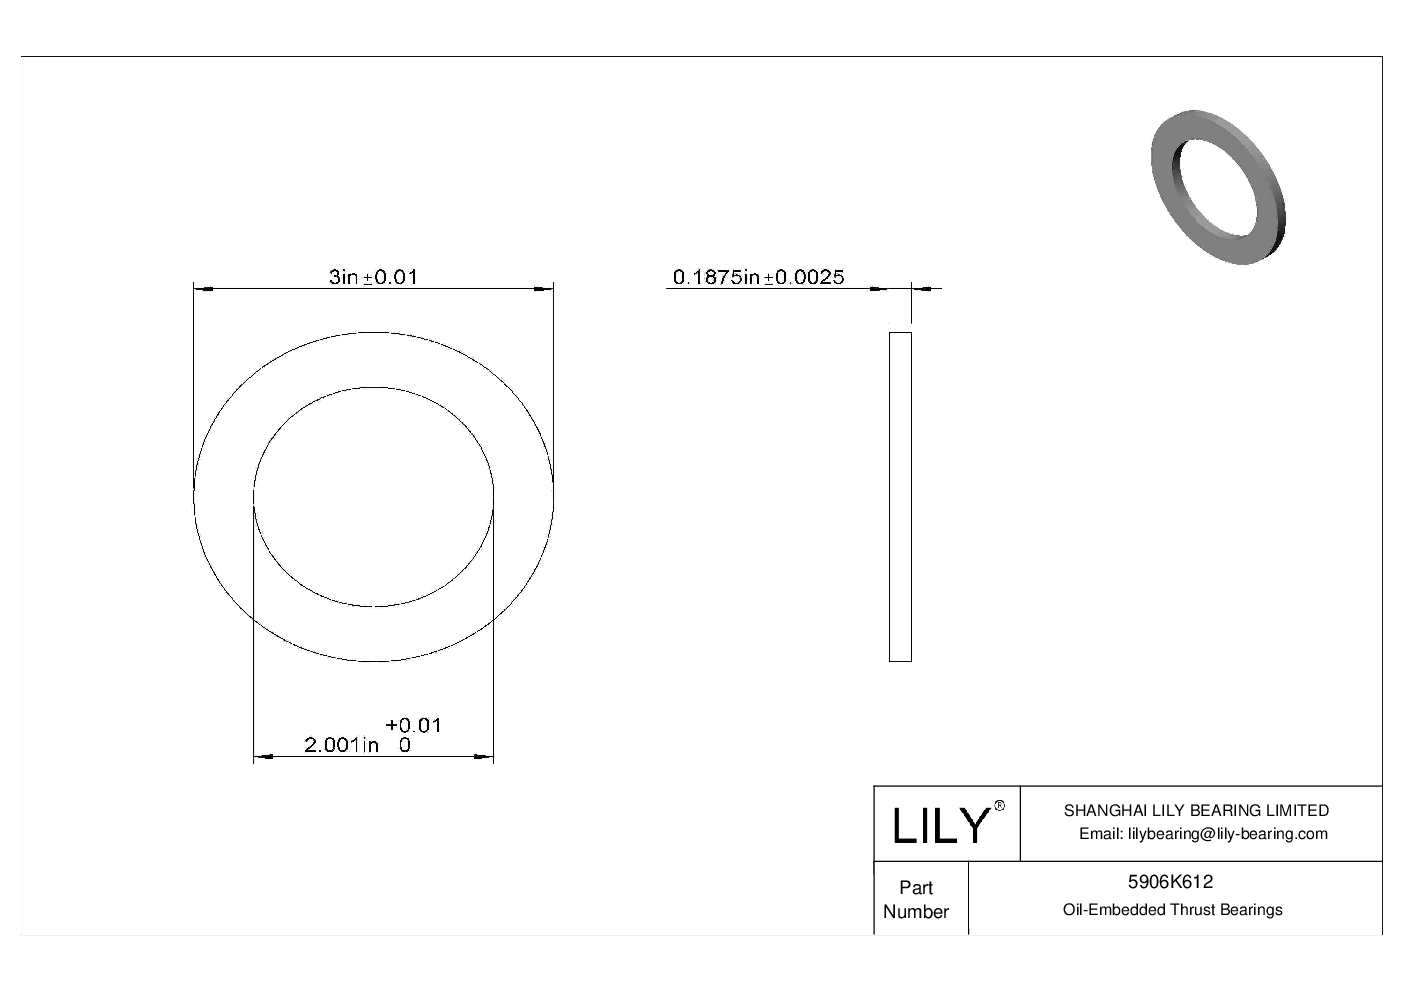 FJAGKGBC Oil-Embedded Thrust Bearings cad drawing